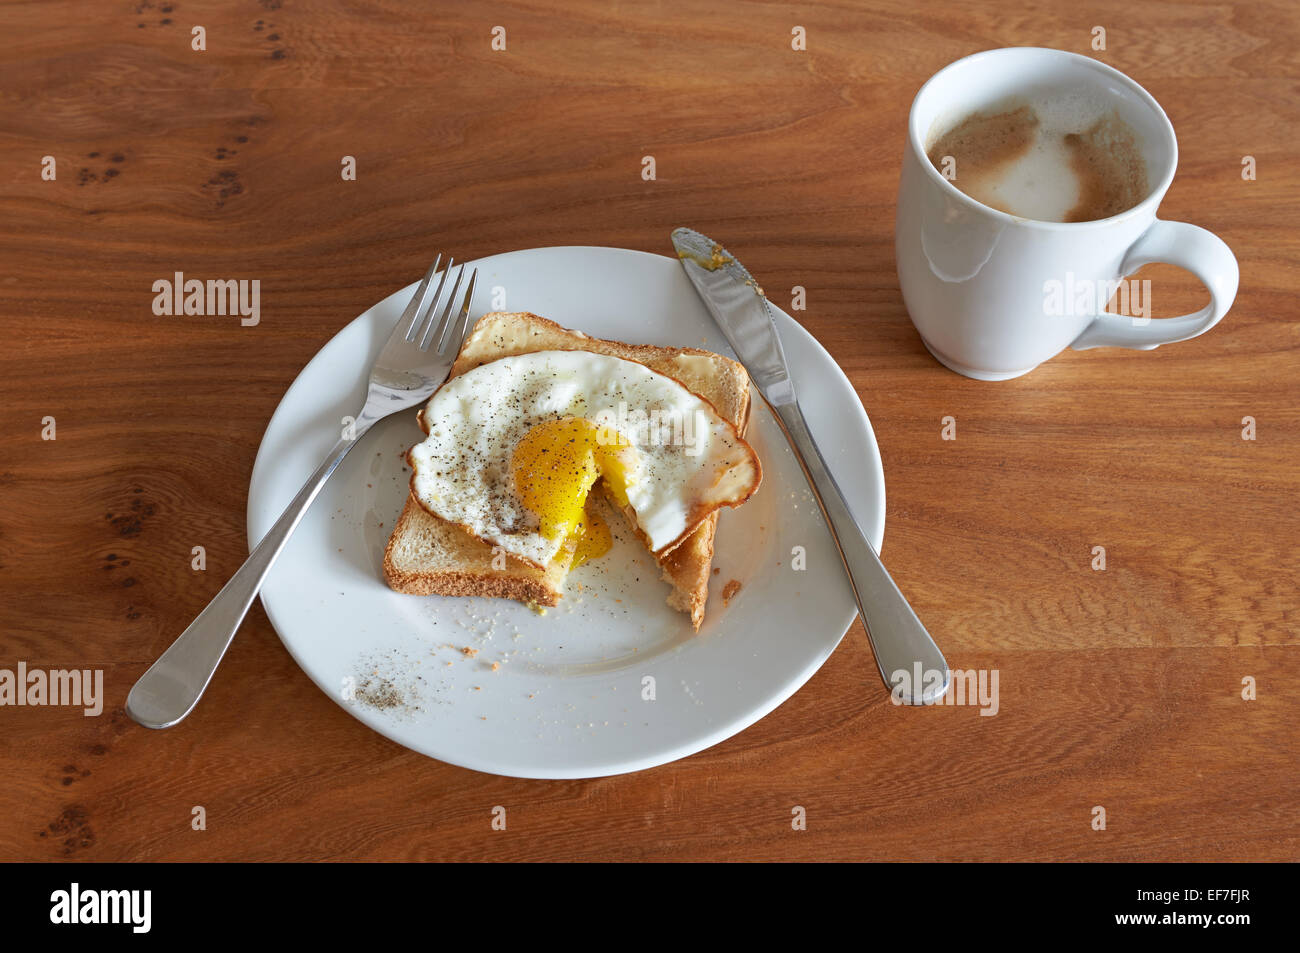 Fried egg on toast with coffee Stock Photo